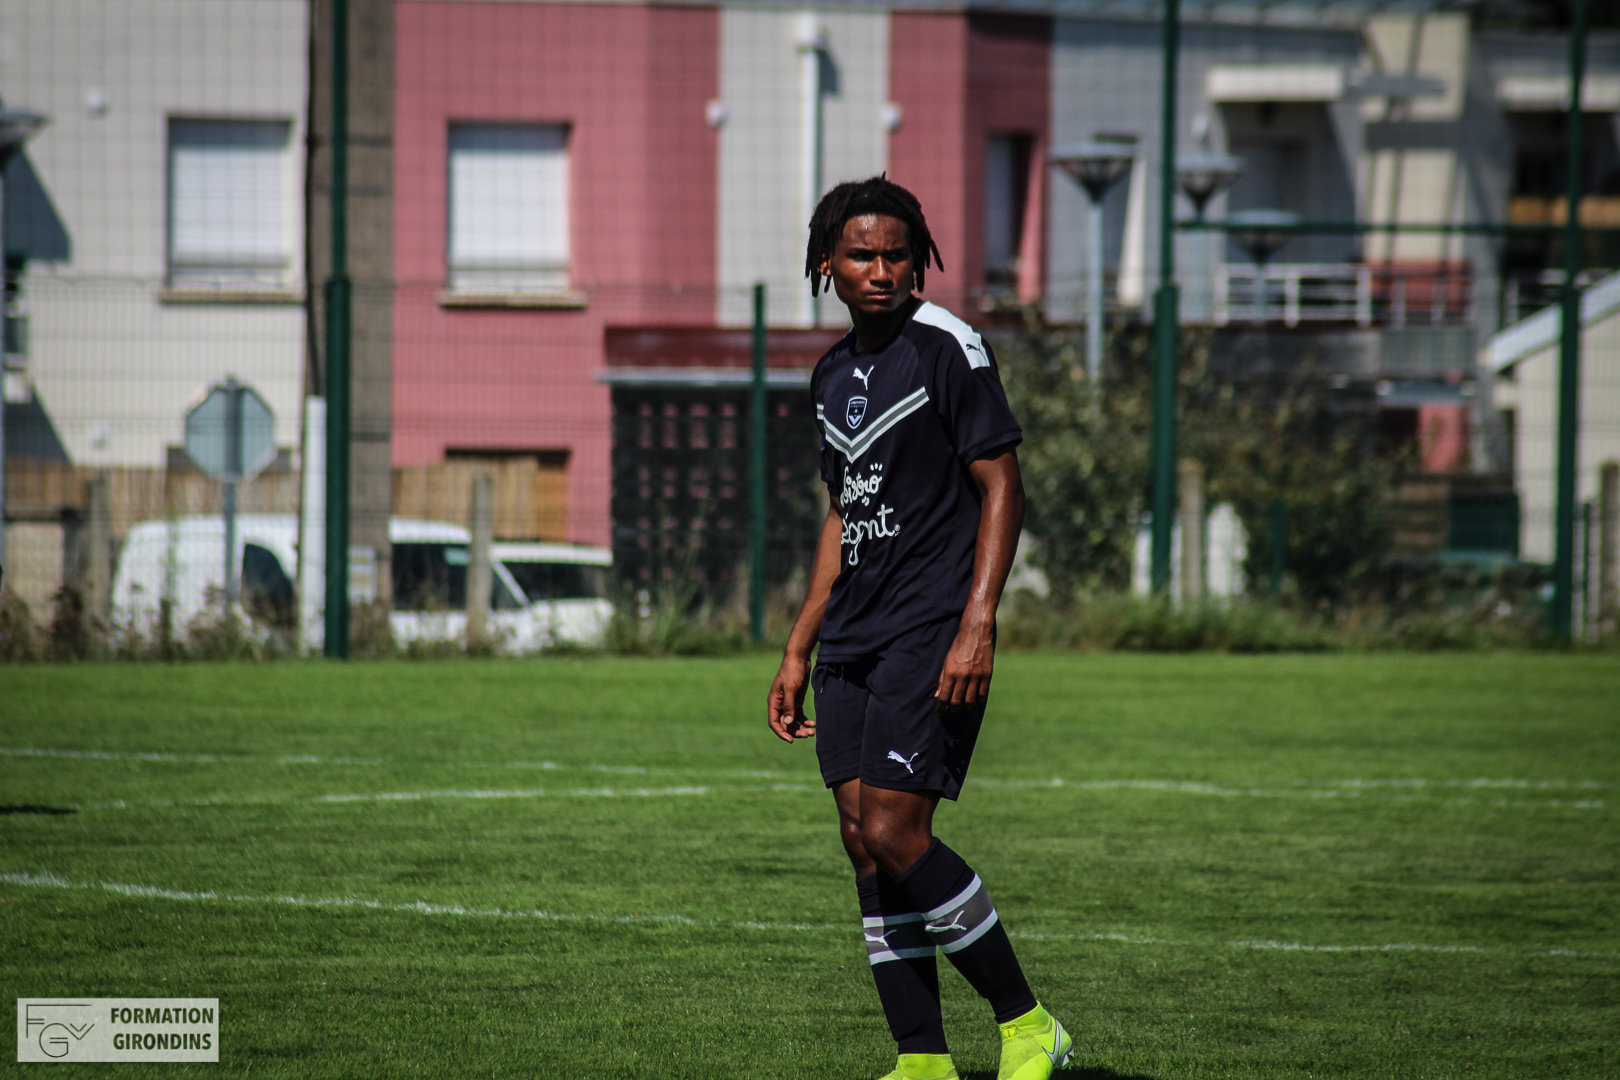 Cfa Girondins : Une victoire pour commencer - Formation Girondins 